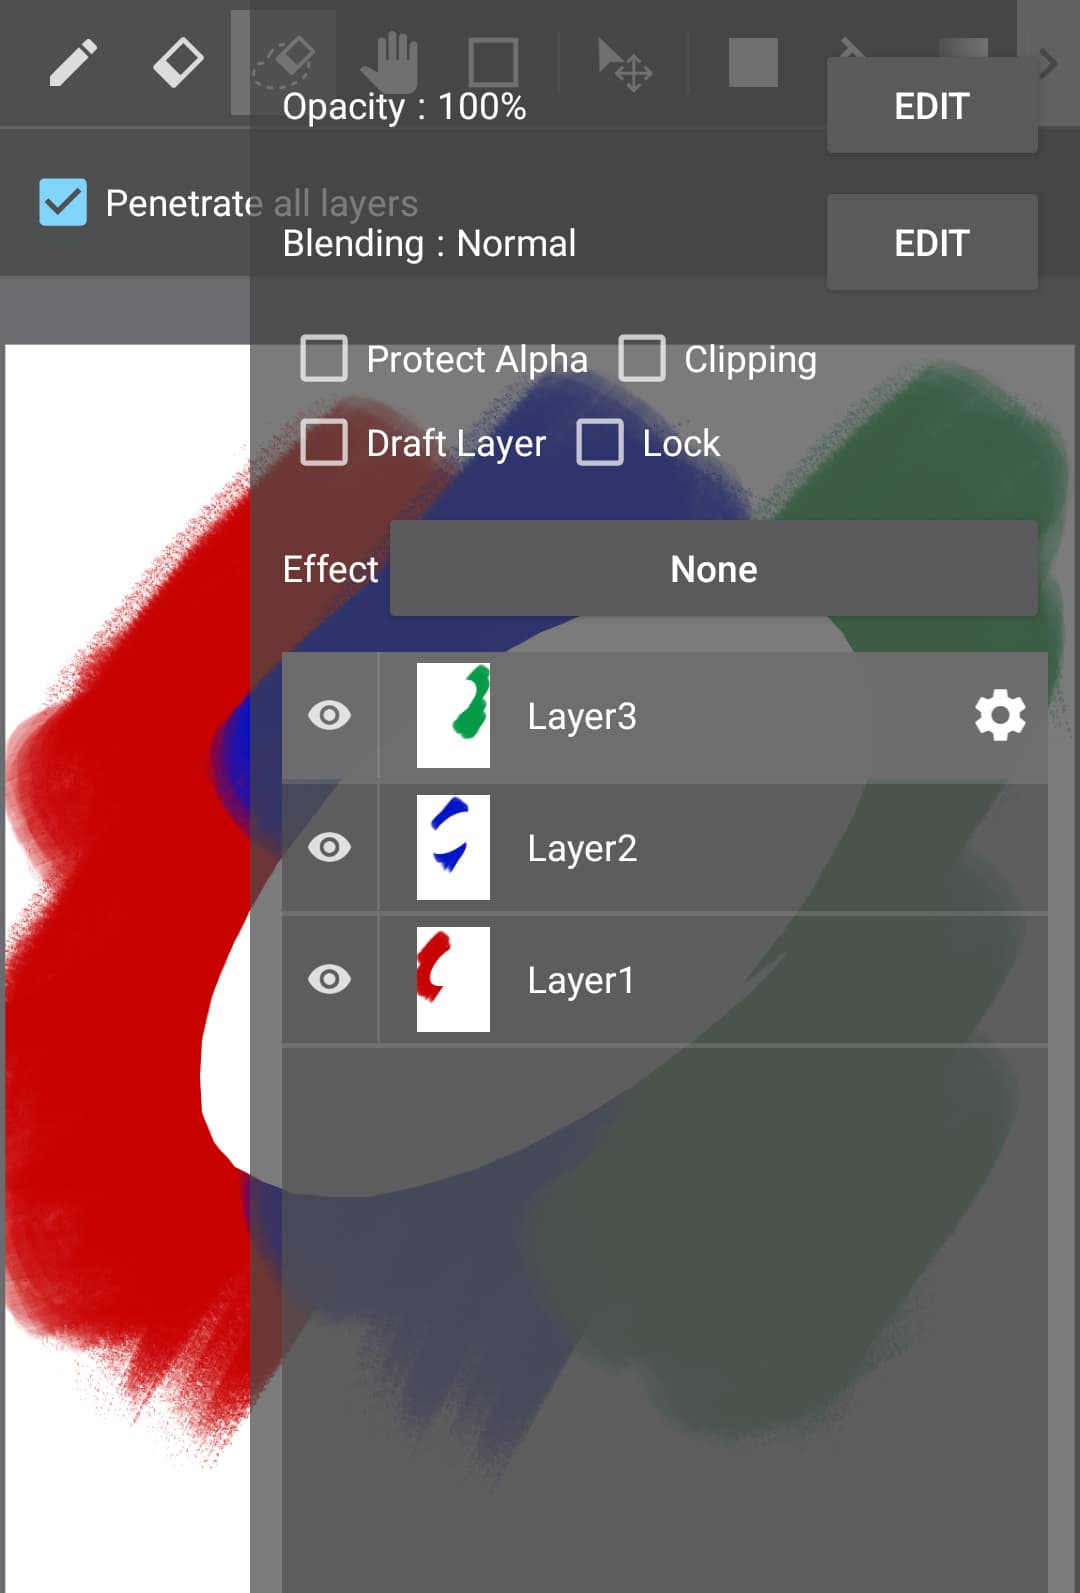 [android] How to Use the Eraser(Lasso) Tool - Penetrate all layers